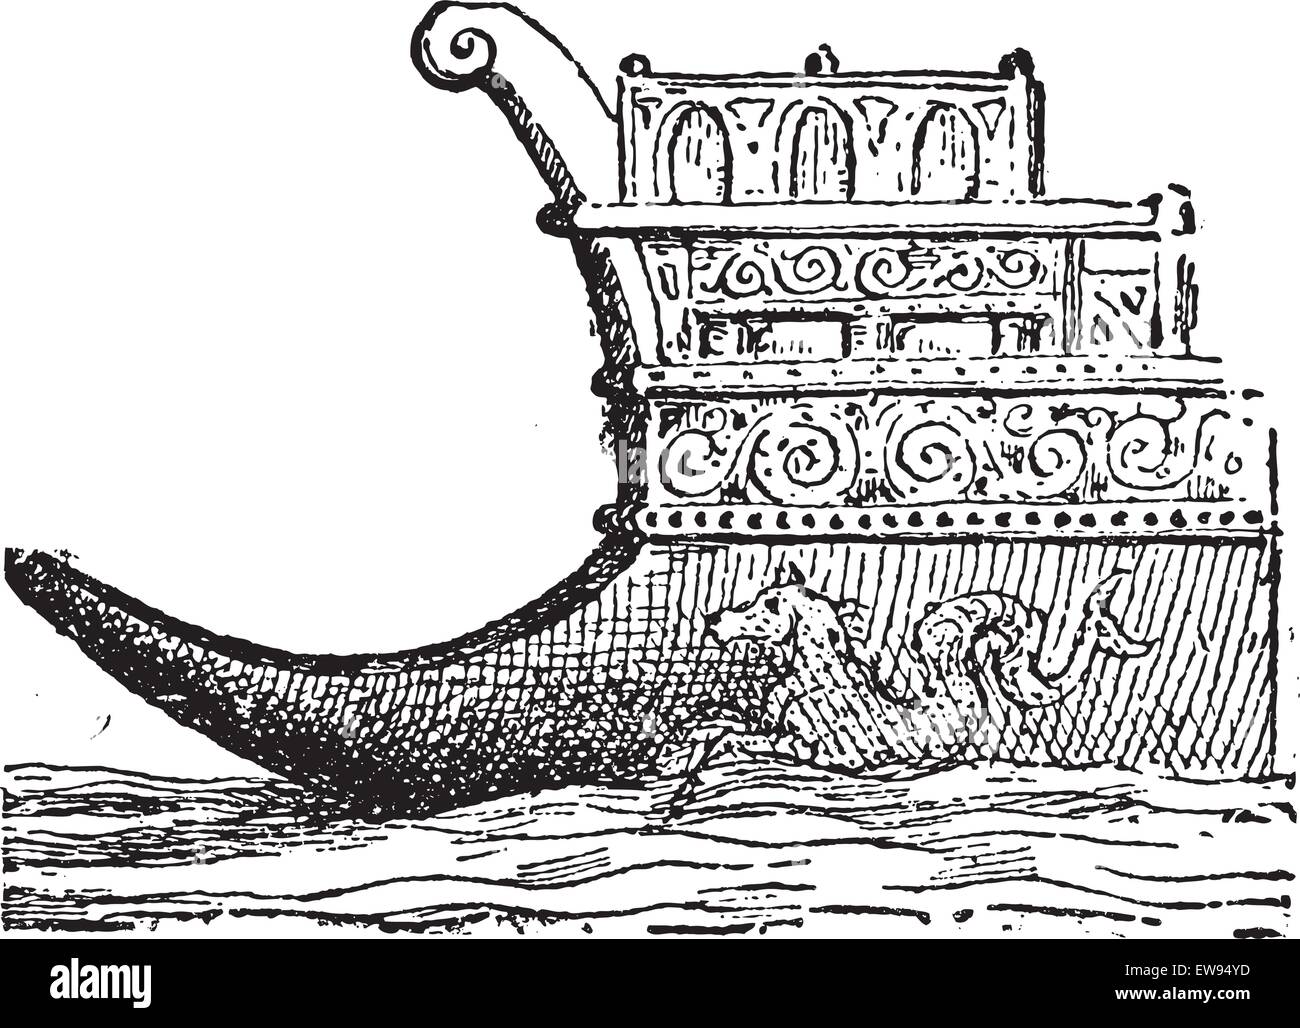 Rostrum or Naval Ram, vintage engraved illustration. Dictionary of words and things - Larive and Fleury - 1895. Stock Vector